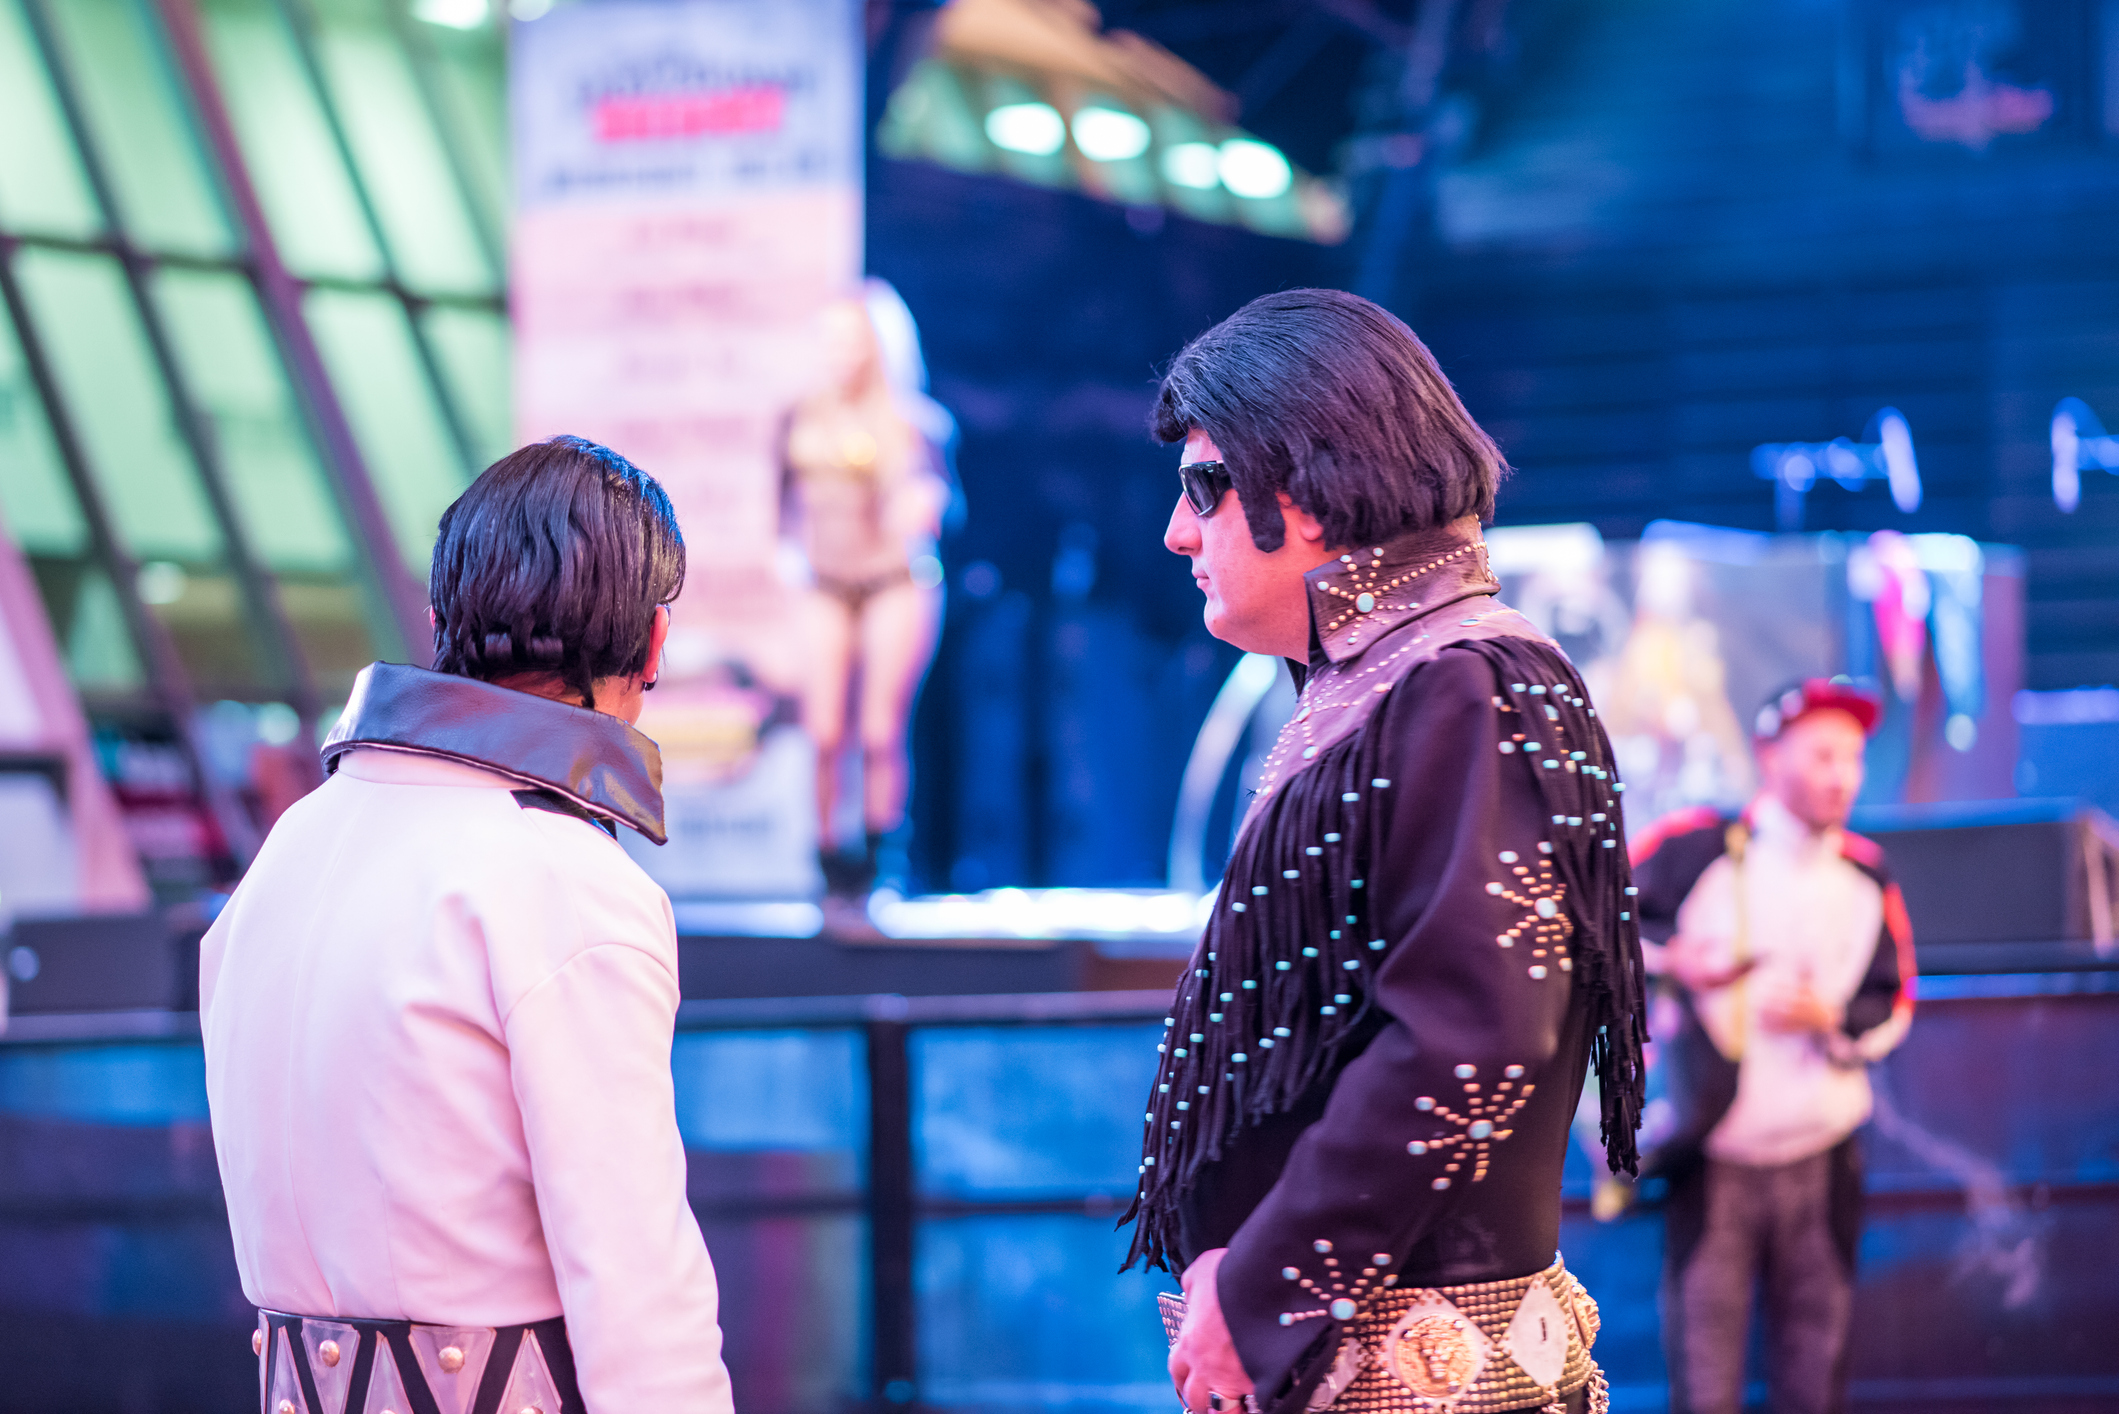 Las Vegas, Nevada, November 24, 2017: Two Elvis impersonators hanging out at the historic Fremont Street Experience, downtown Las Vegas. Las Vegas attracts millions of visitors yearly.